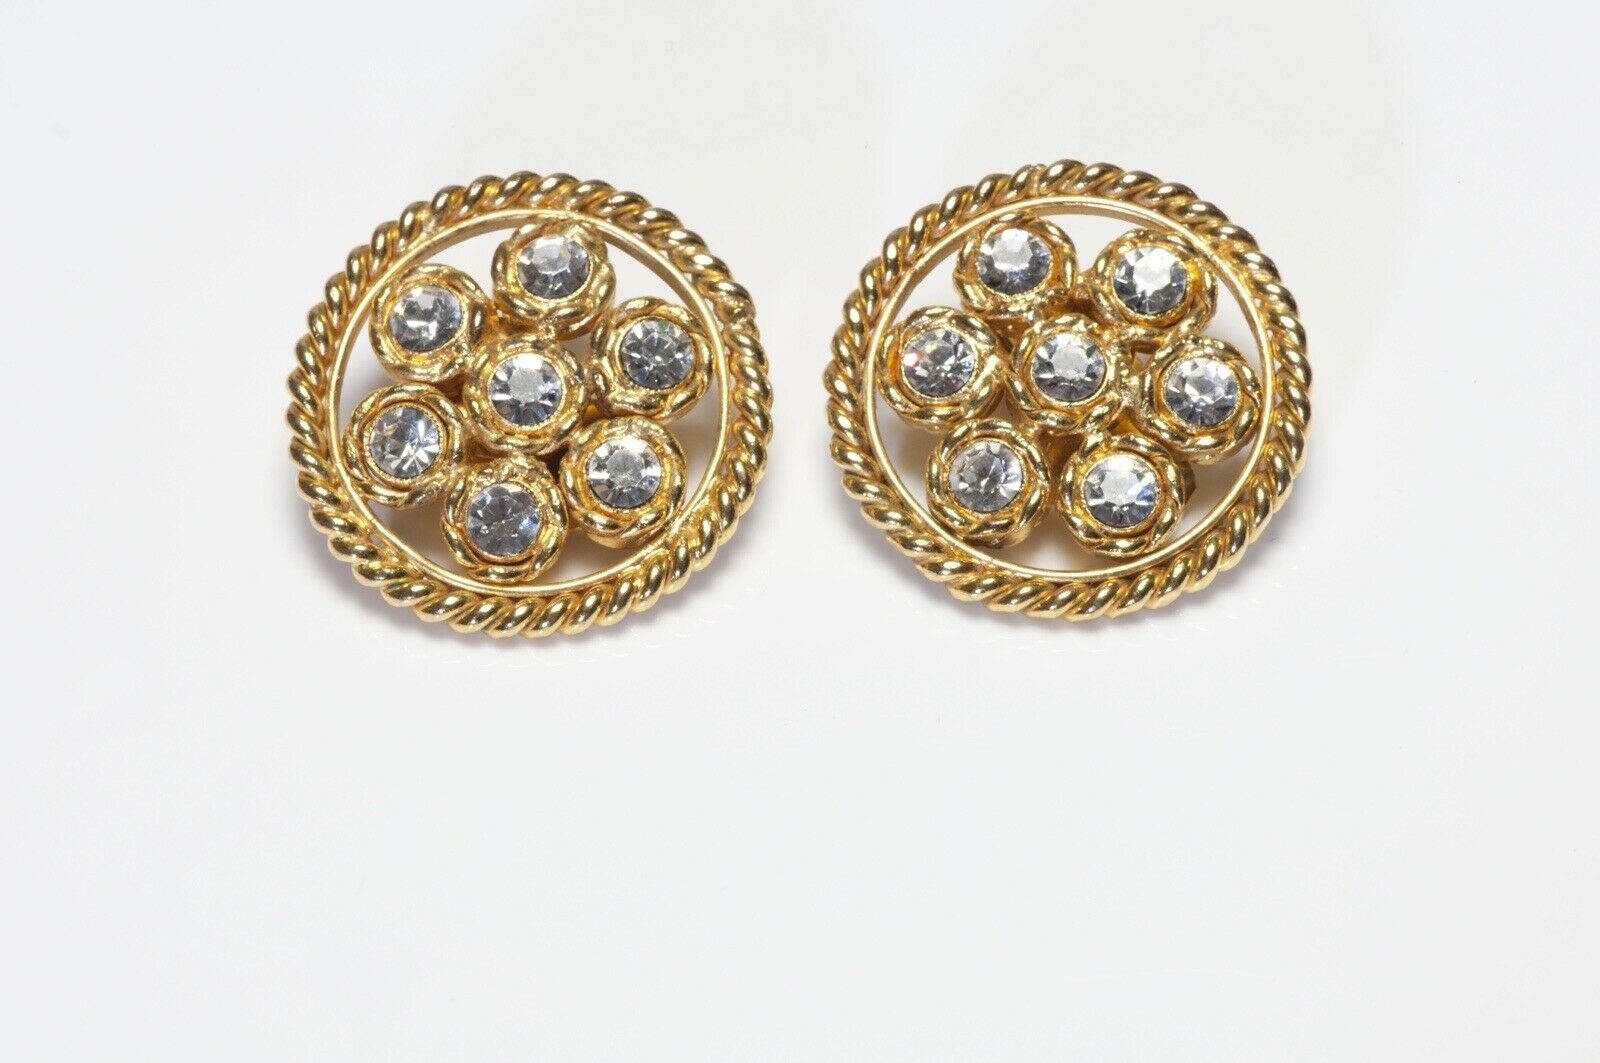 CHANEL Paris 1970’s Gold Plated Crystal Round Earrings - DSF Antique Jewelry